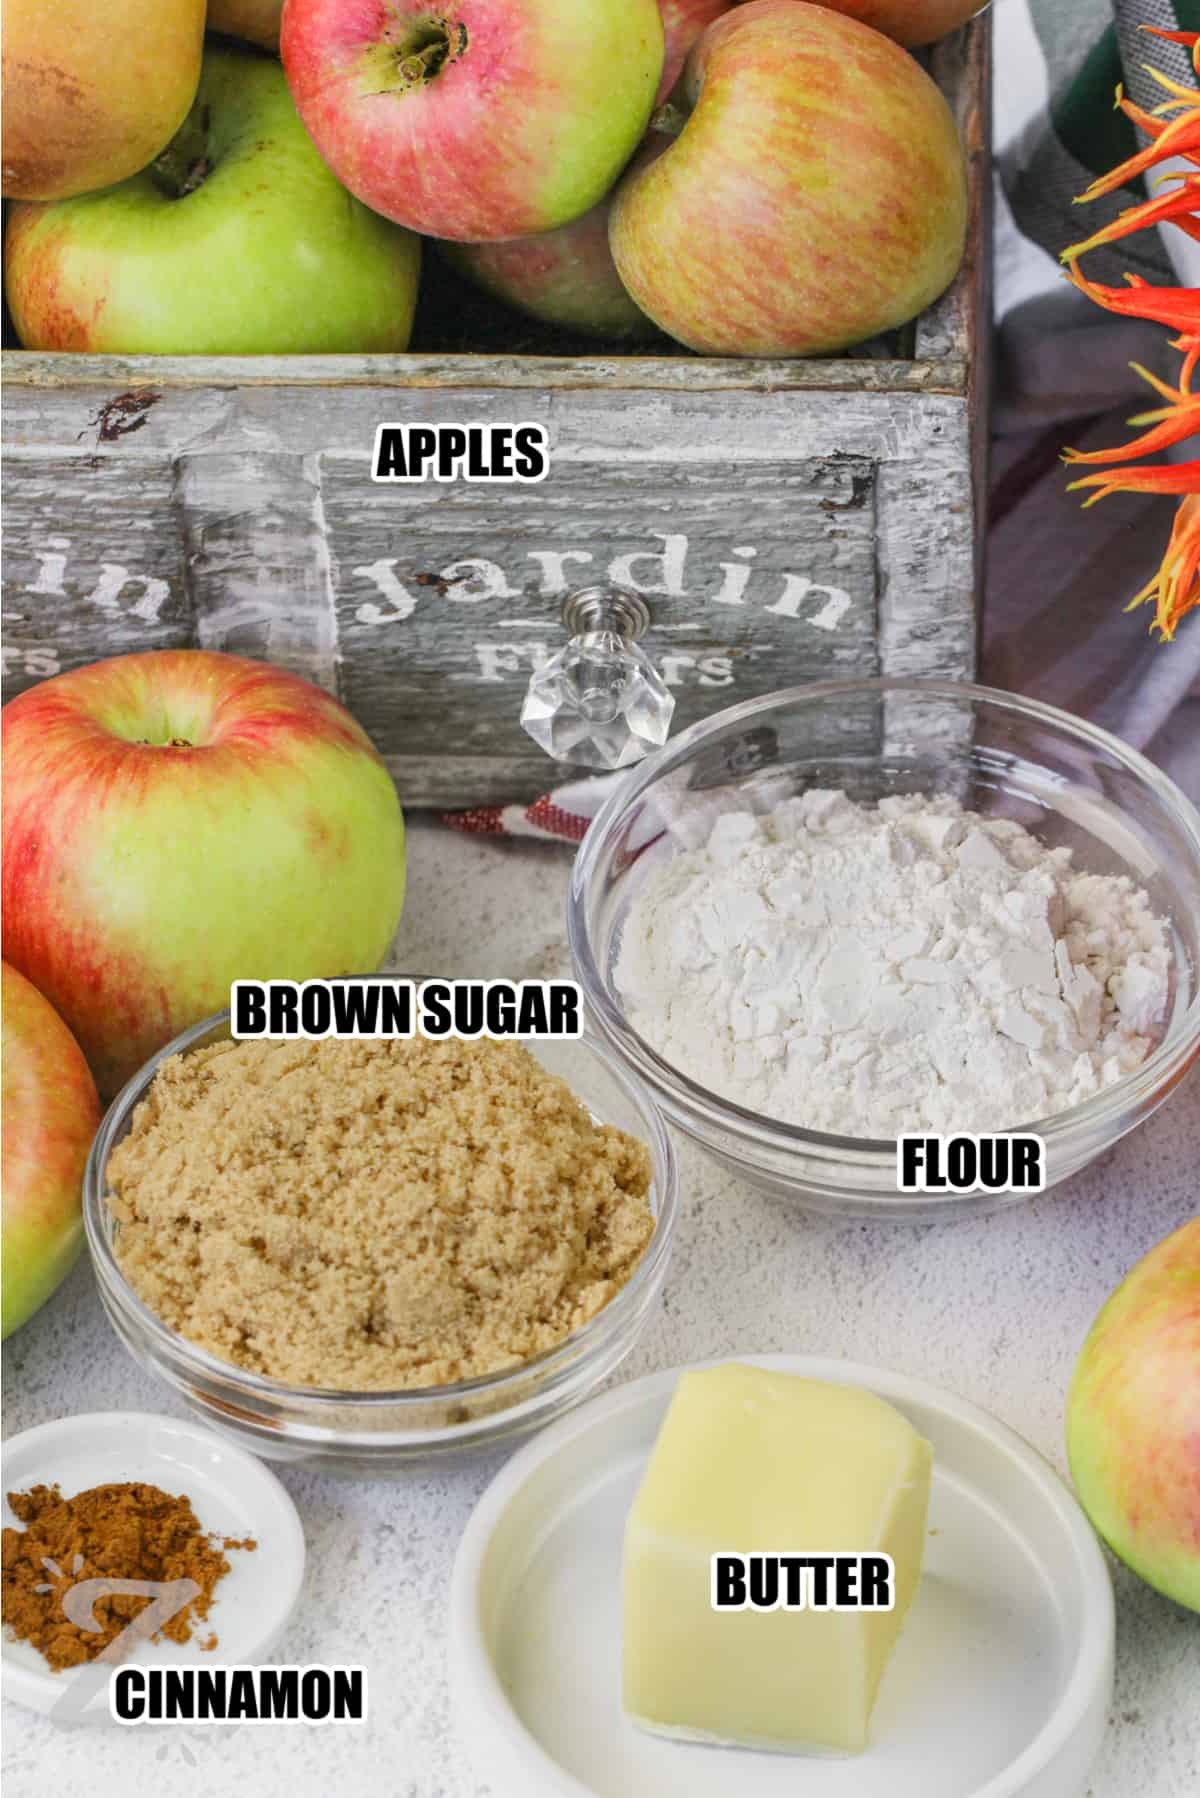 ingredients to make Apple Crumble including brown sugar, apples, butter, flour, and cinnamon